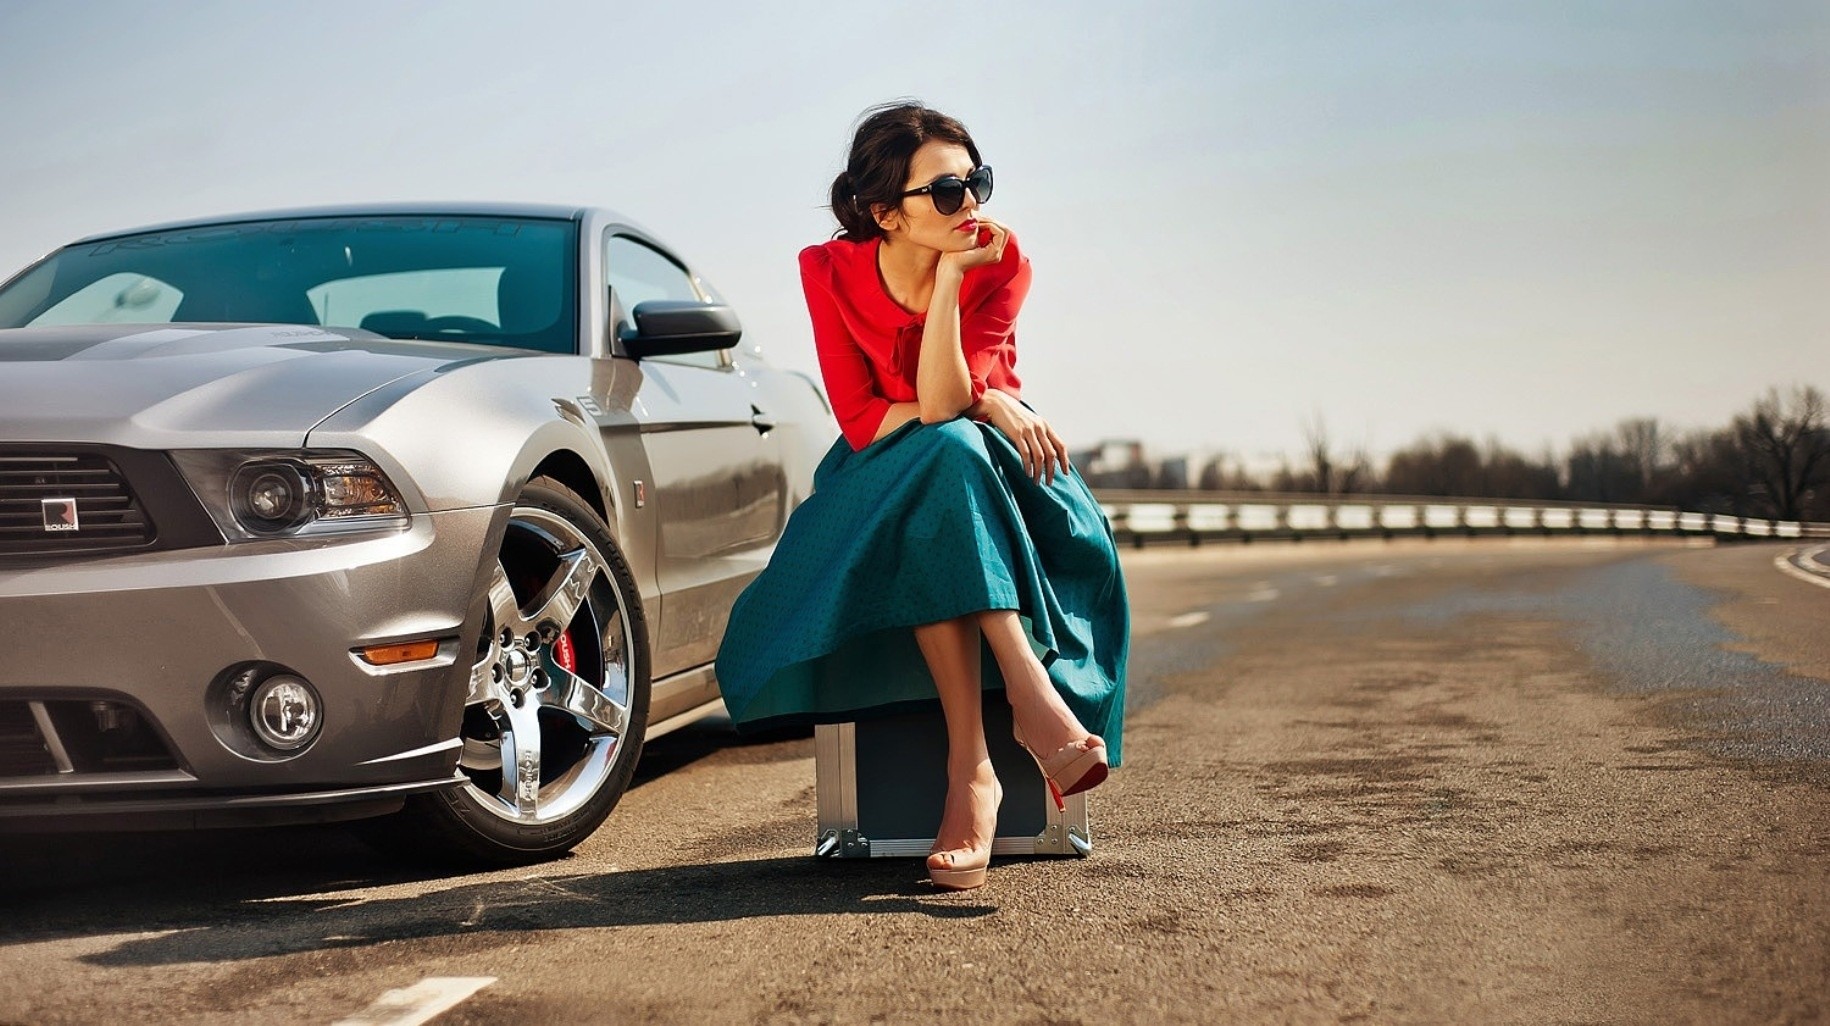 women With Cars Wallpaper